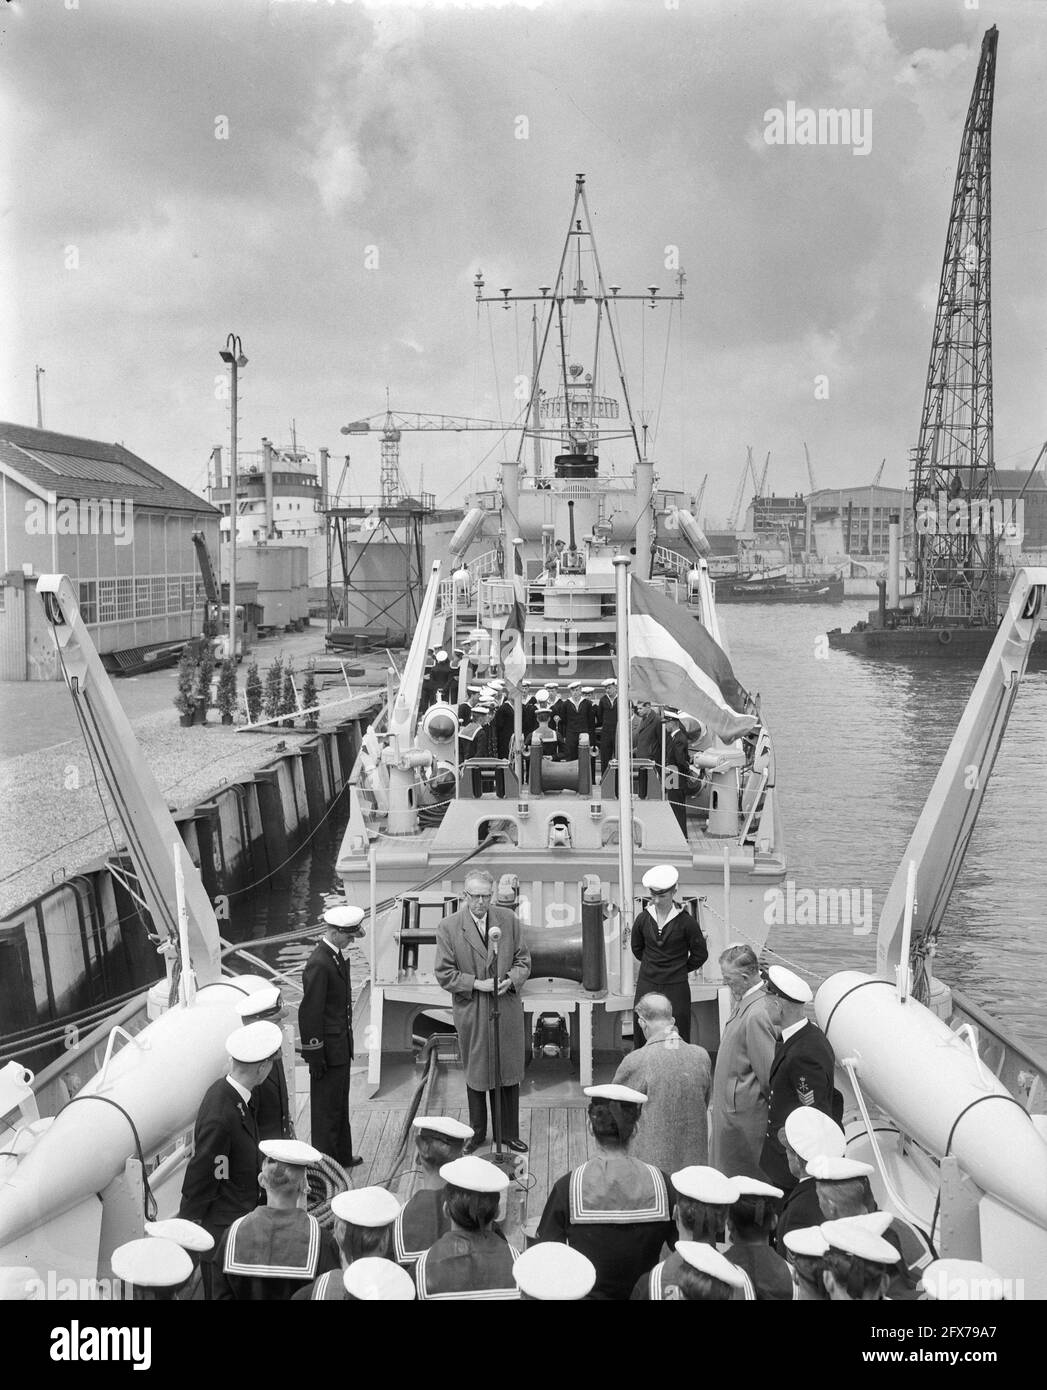 Commissioning minesweepers Abcoude and Naarden Werf Gusto Schiedam, May 18, 1956, Commissioning, MINEENVEGERS, The Netherlands, 20th century press agency photo, news to remember, documentary, historic photography 1945-1990, visual stories, human history of the Twentieth Century, capturing moments in time Stock Photo